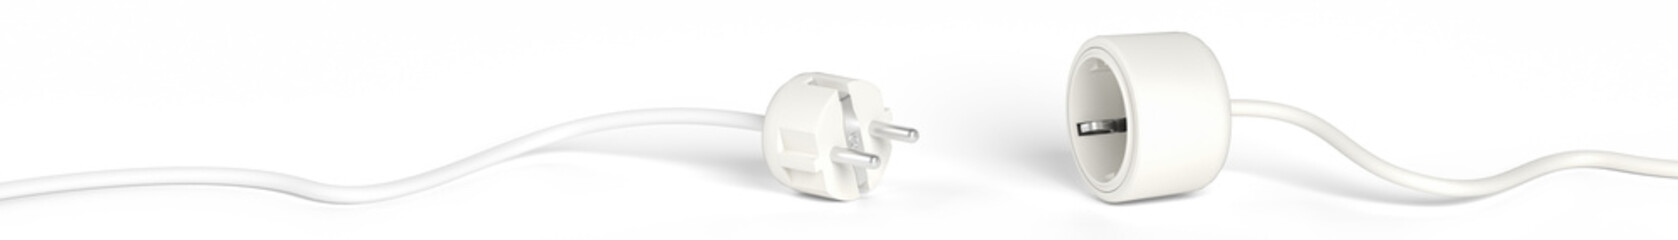 Blackout or disruption concept: Separated Plug and Socket in white and with cable lying on a floor...